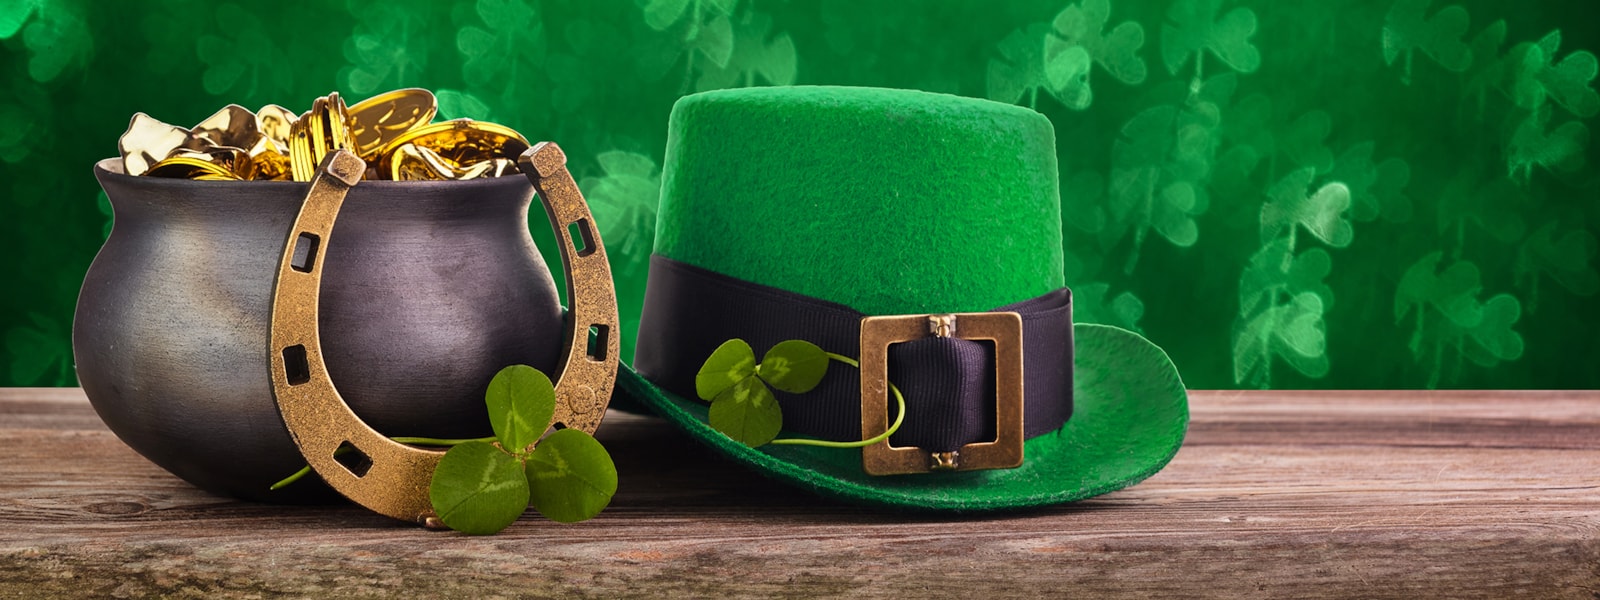 A green hat, pot of gold and horseshoe